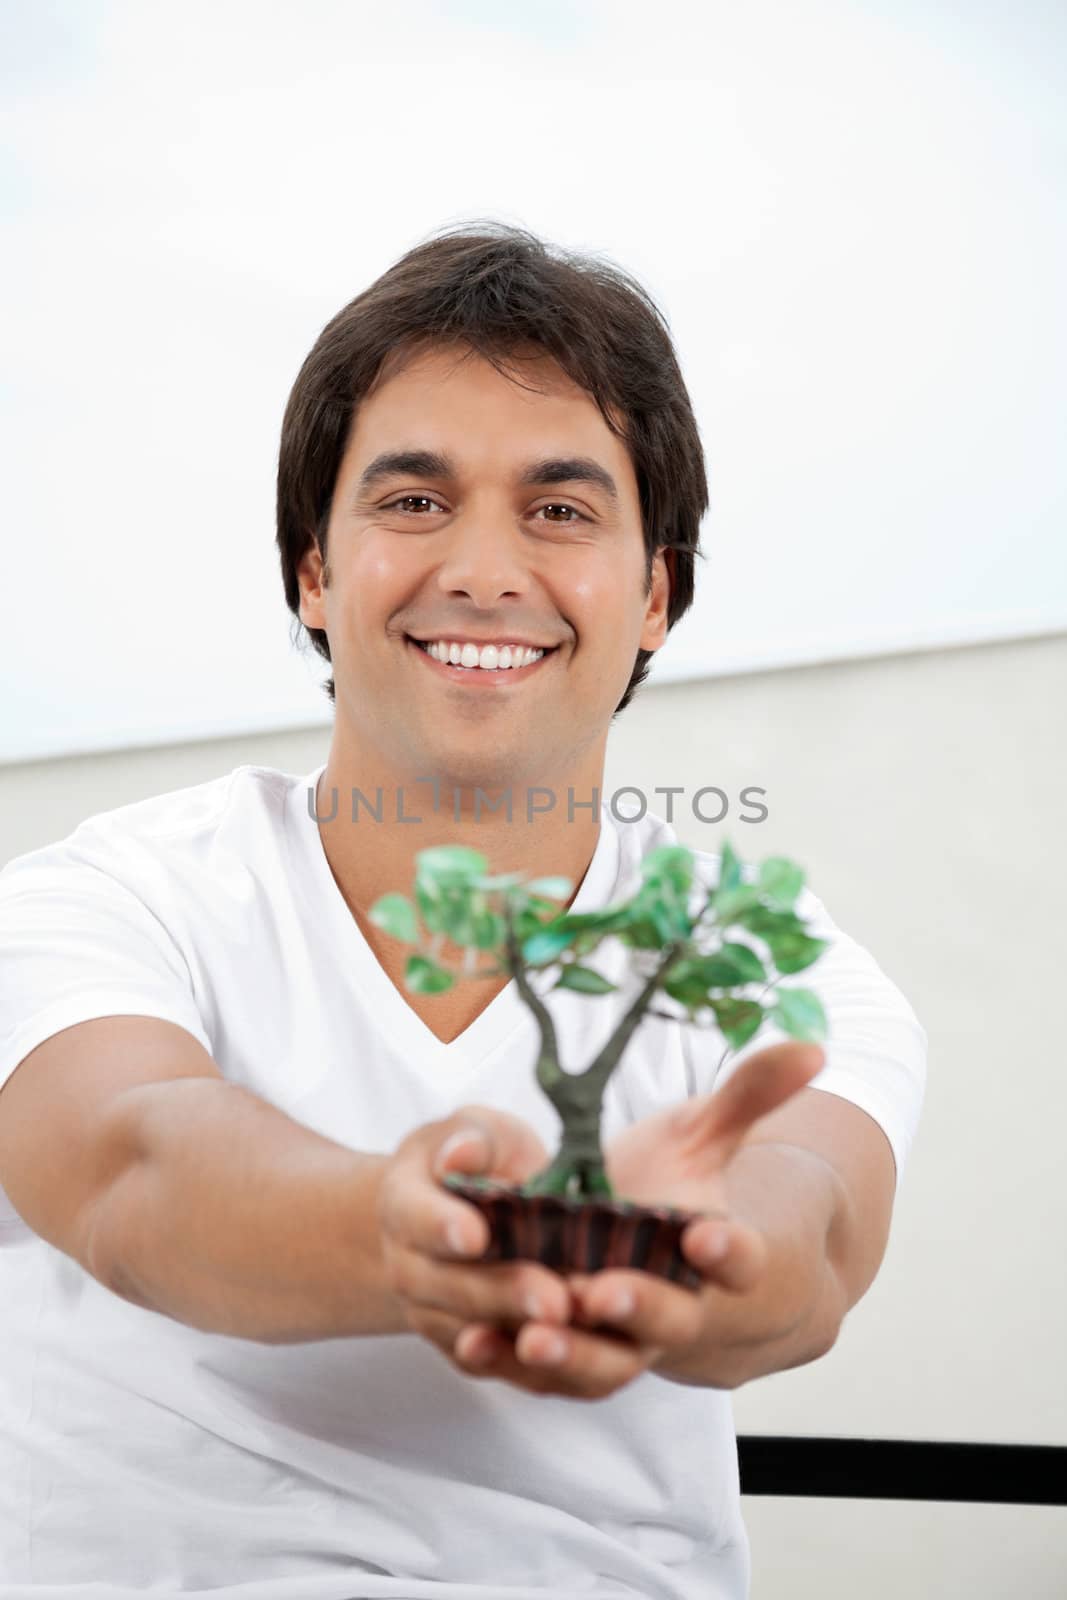 Portrait of handsome young man holding a small artificial plant